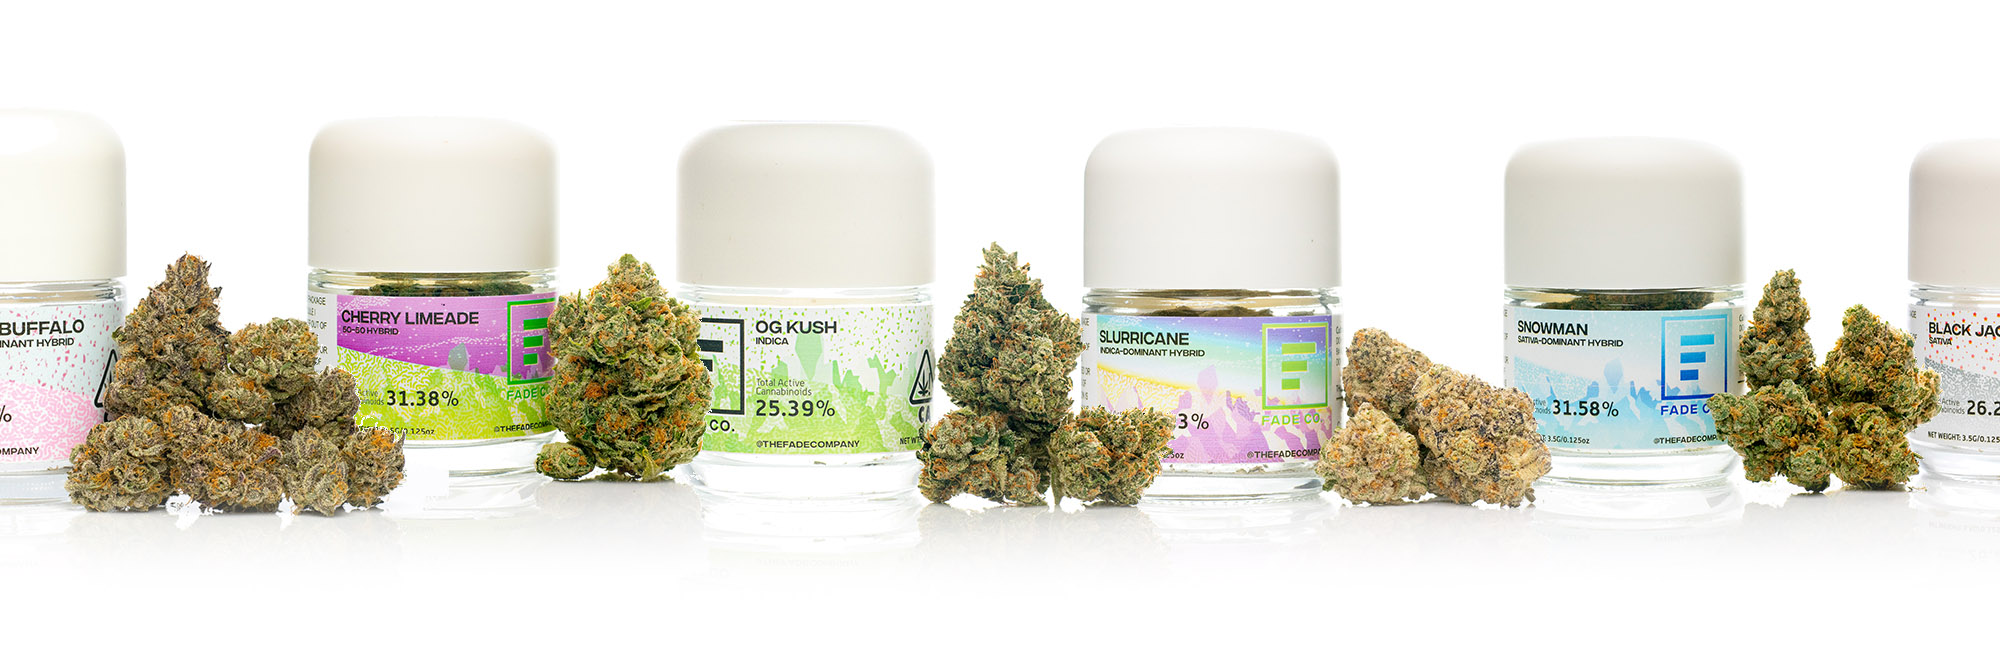 fadeco flower eighths product photography